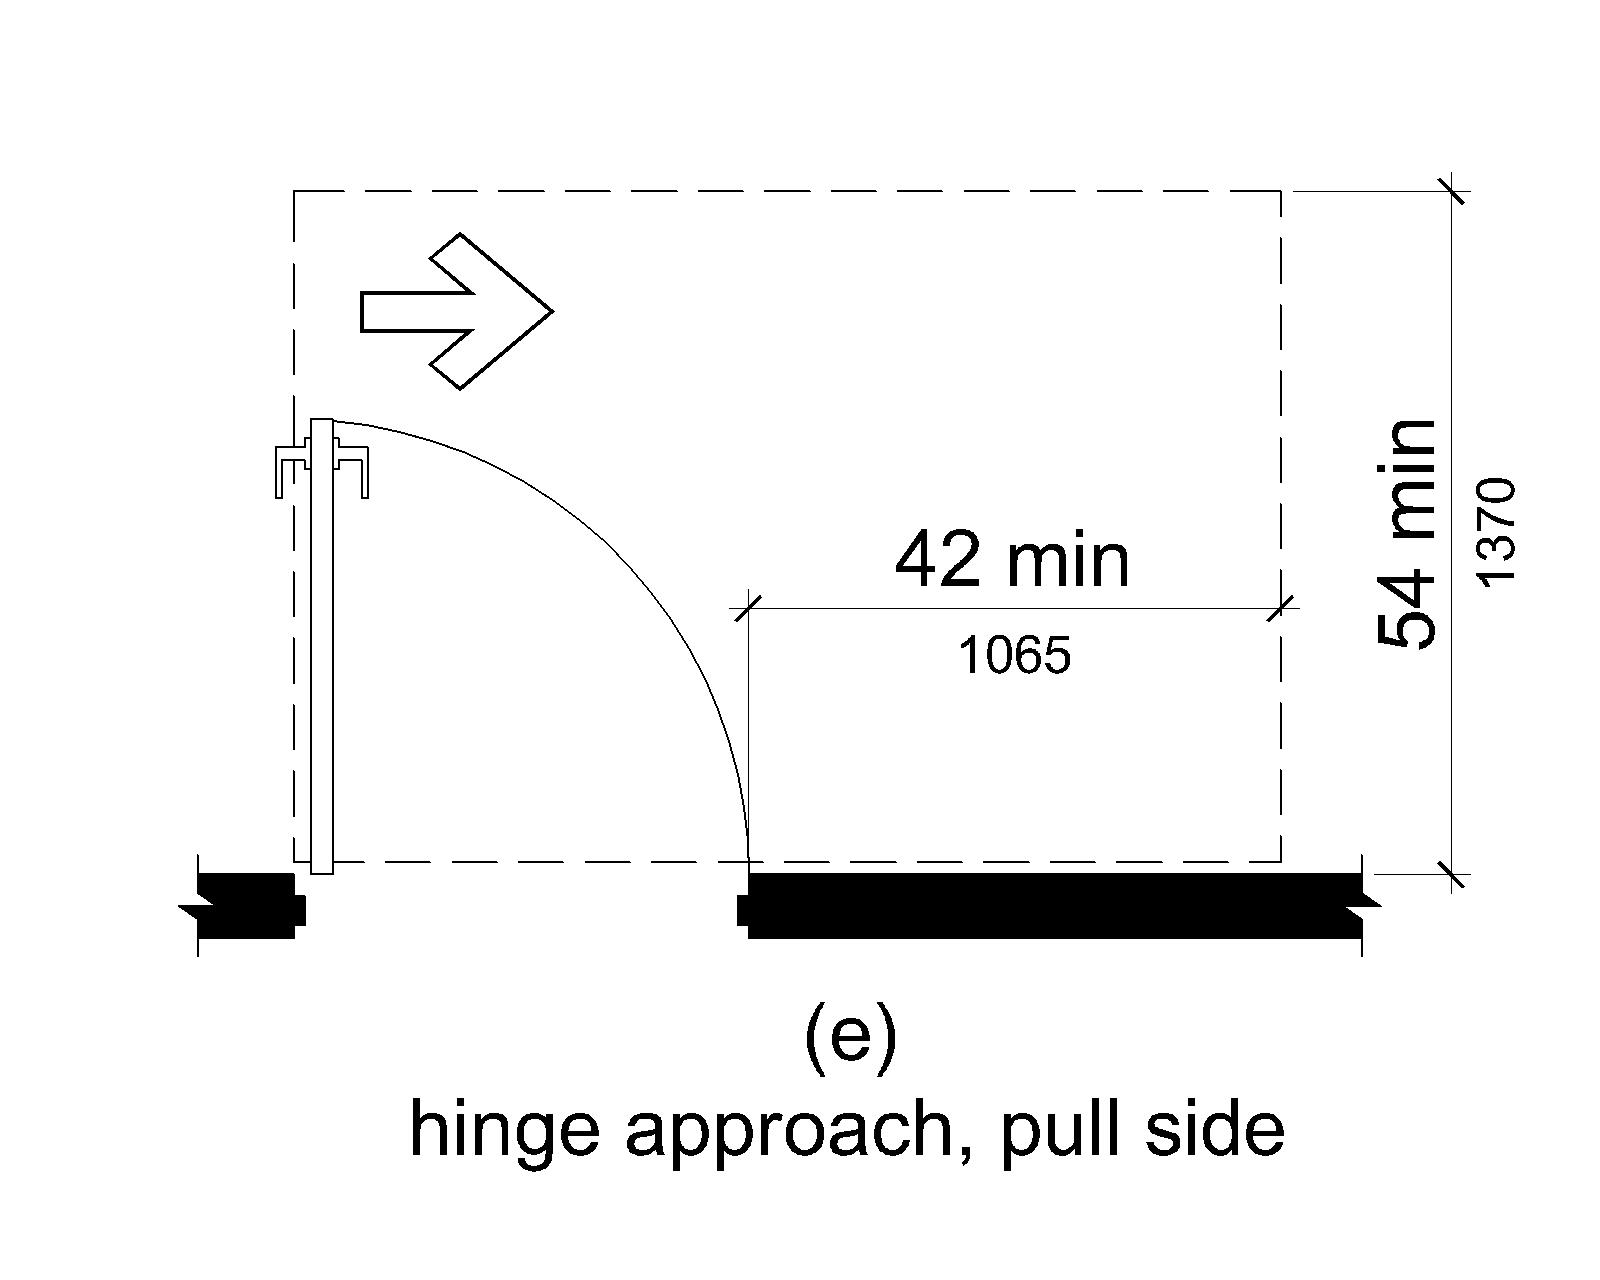 (e) If this space extends 42 inches (1065 mm) minimum beyond the latch side of the door, it can extend 54 inches (1370 mm) minimum perpendicular to the doorway.